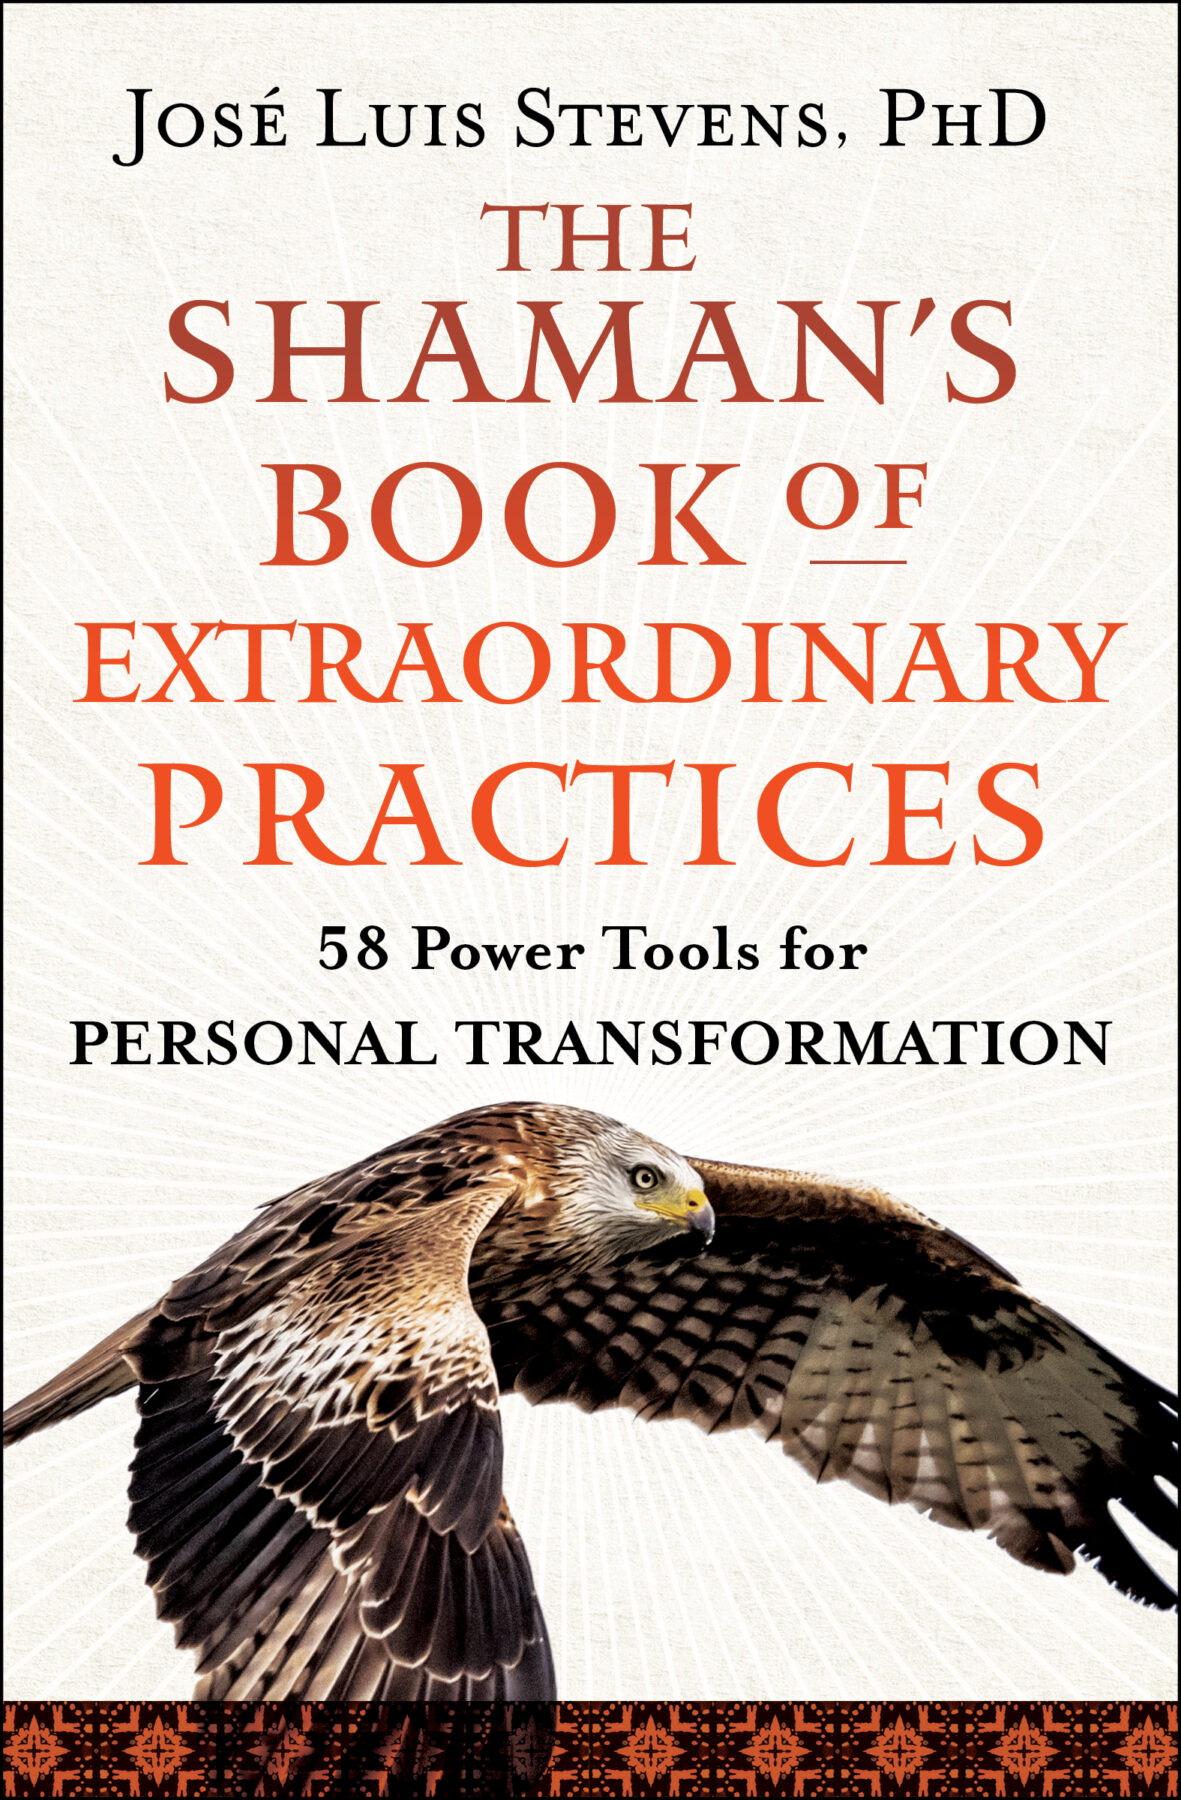 58 Power Tools for Personal Transformation by José Luis Stevens, PhD